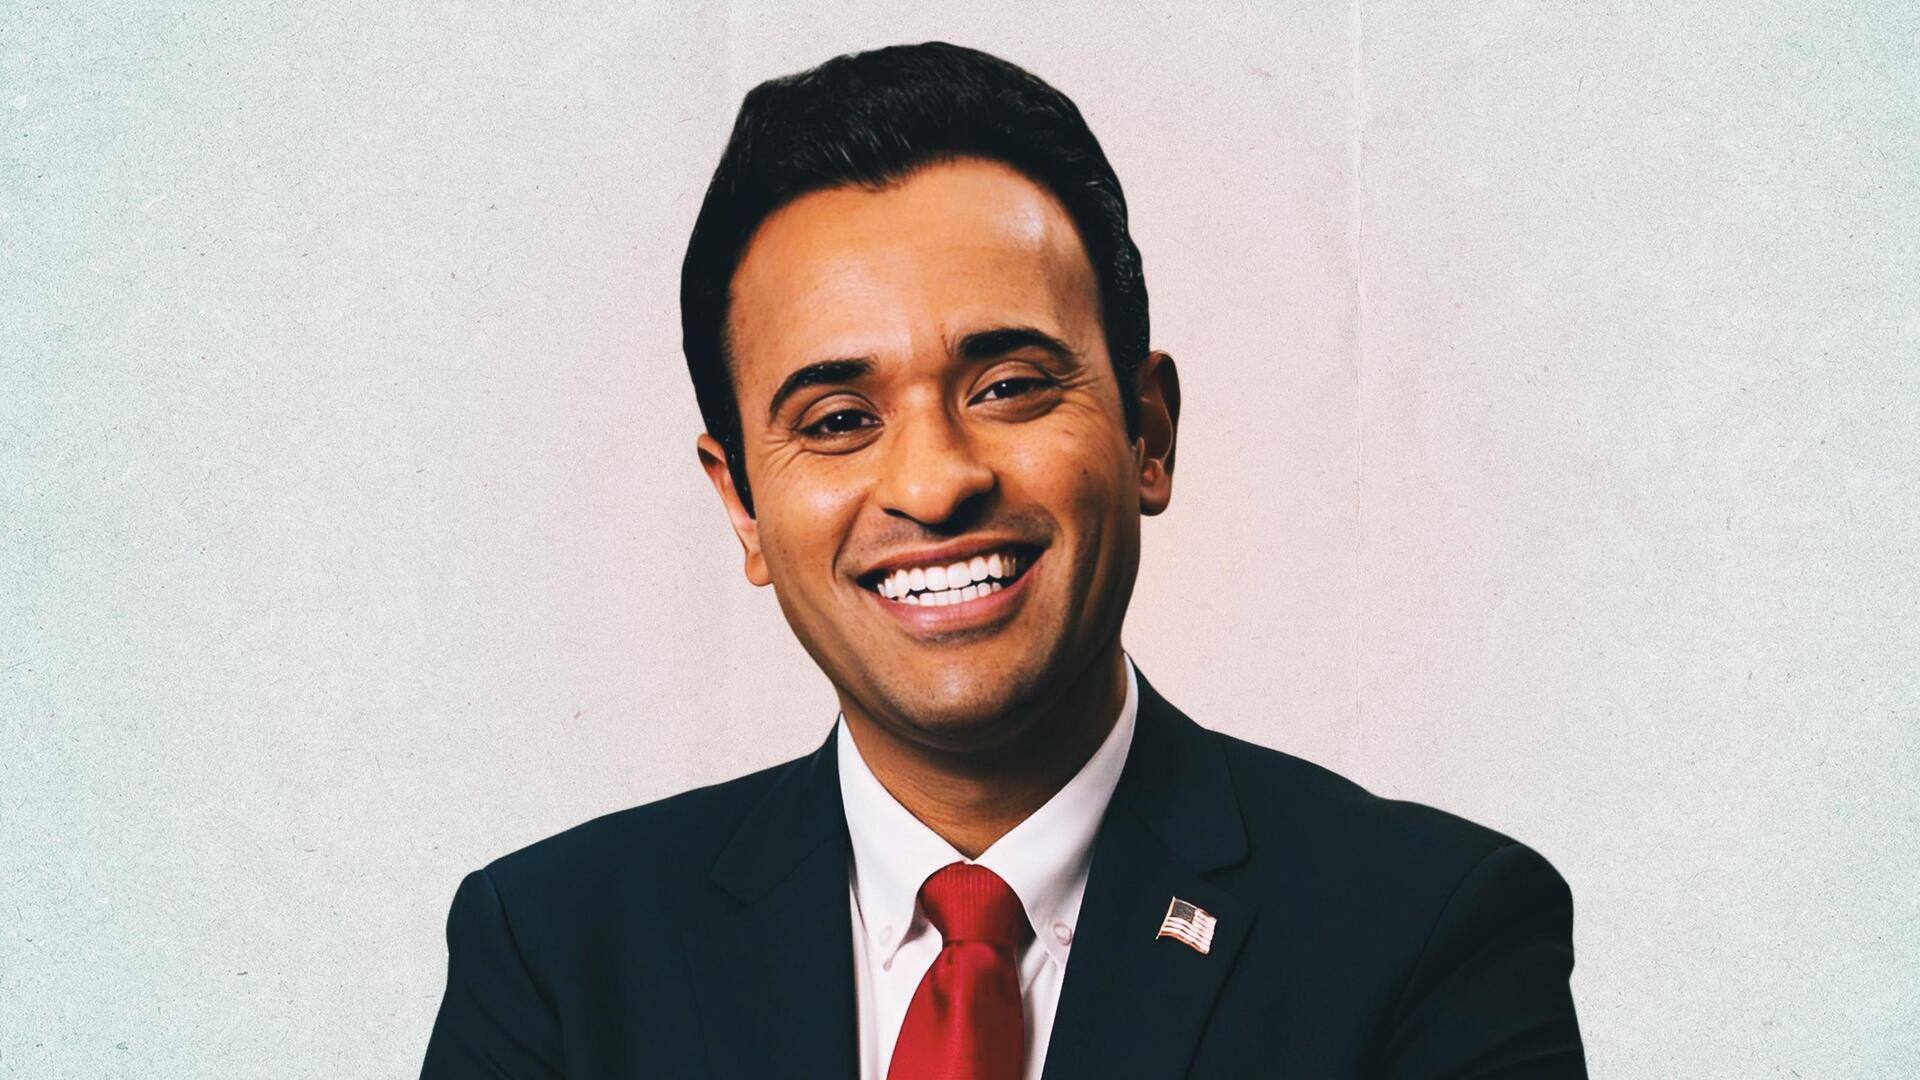 Indian-origin Vivek Ramaswamy drops out of 2024 US presidential race